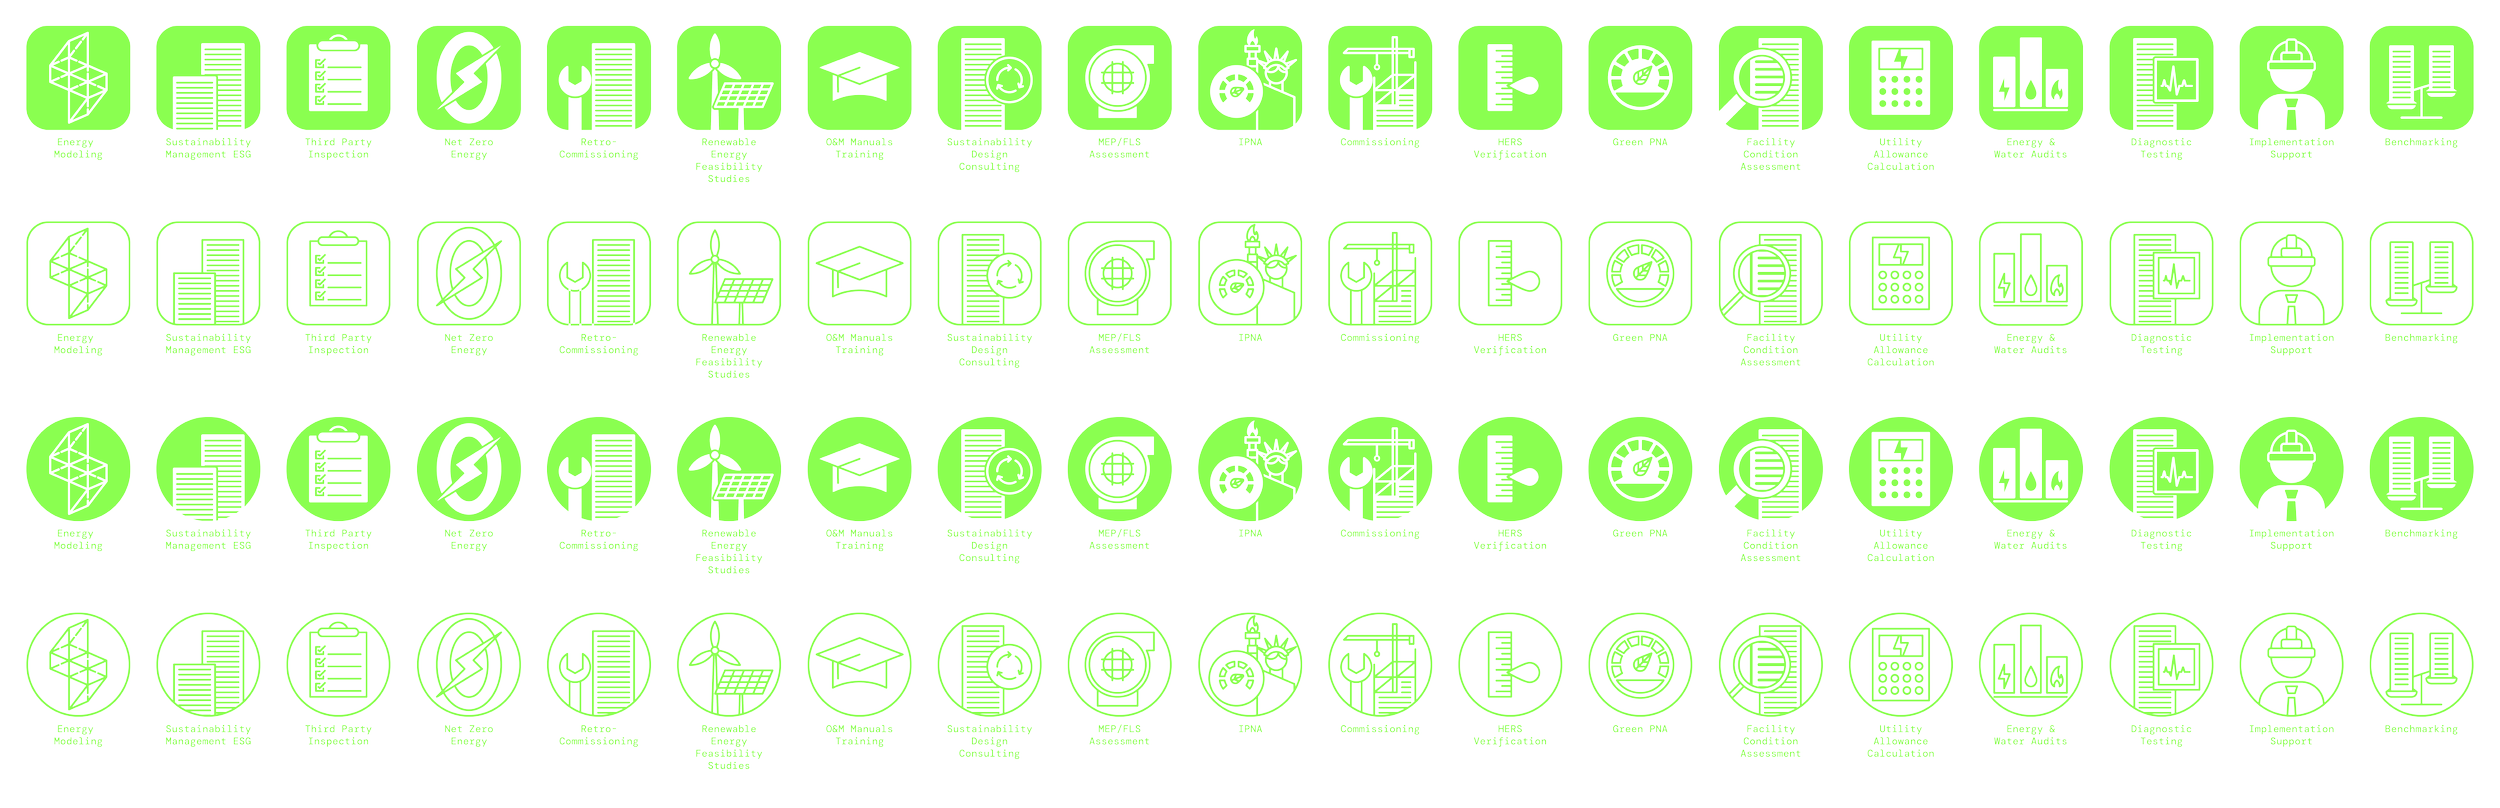 PTE Icons - Arranged-05.png